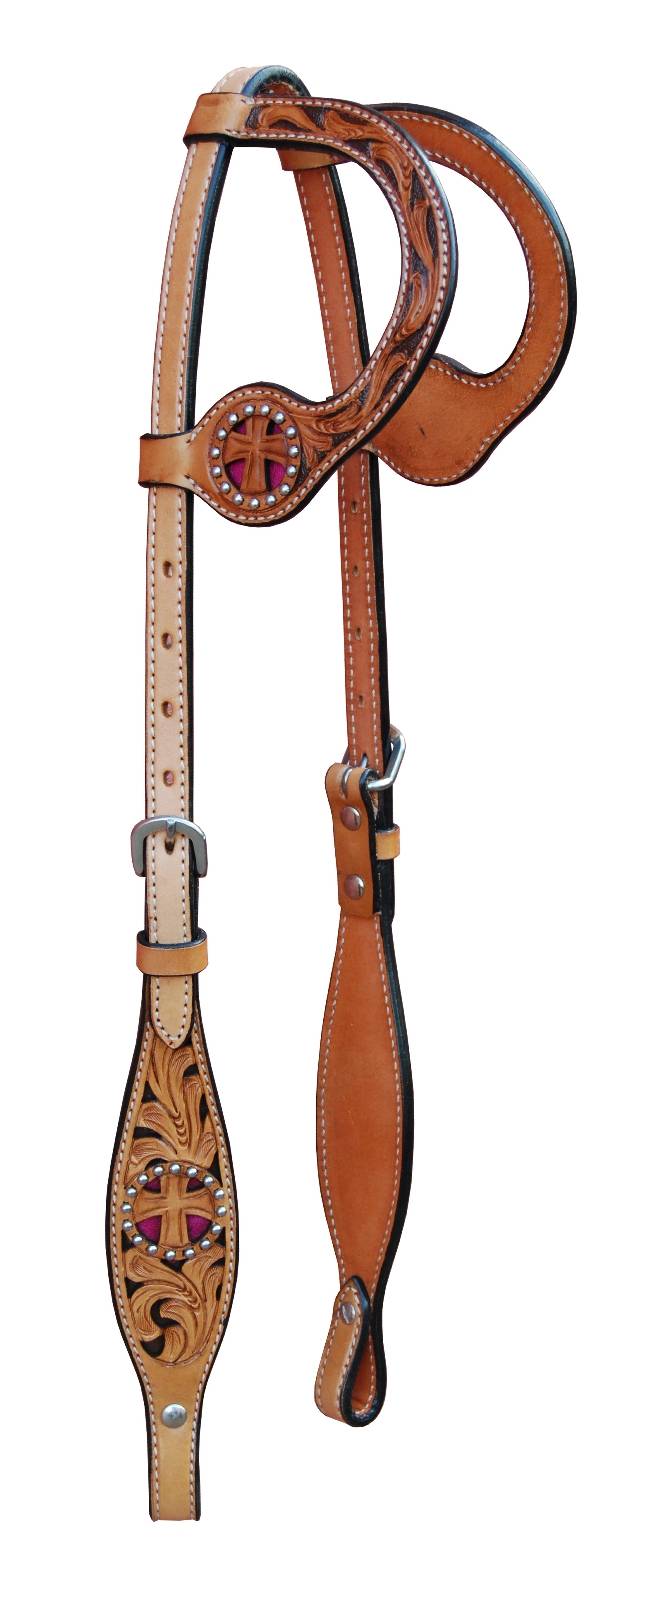 Turn-Two Double Ear Headstall - St. Christopher